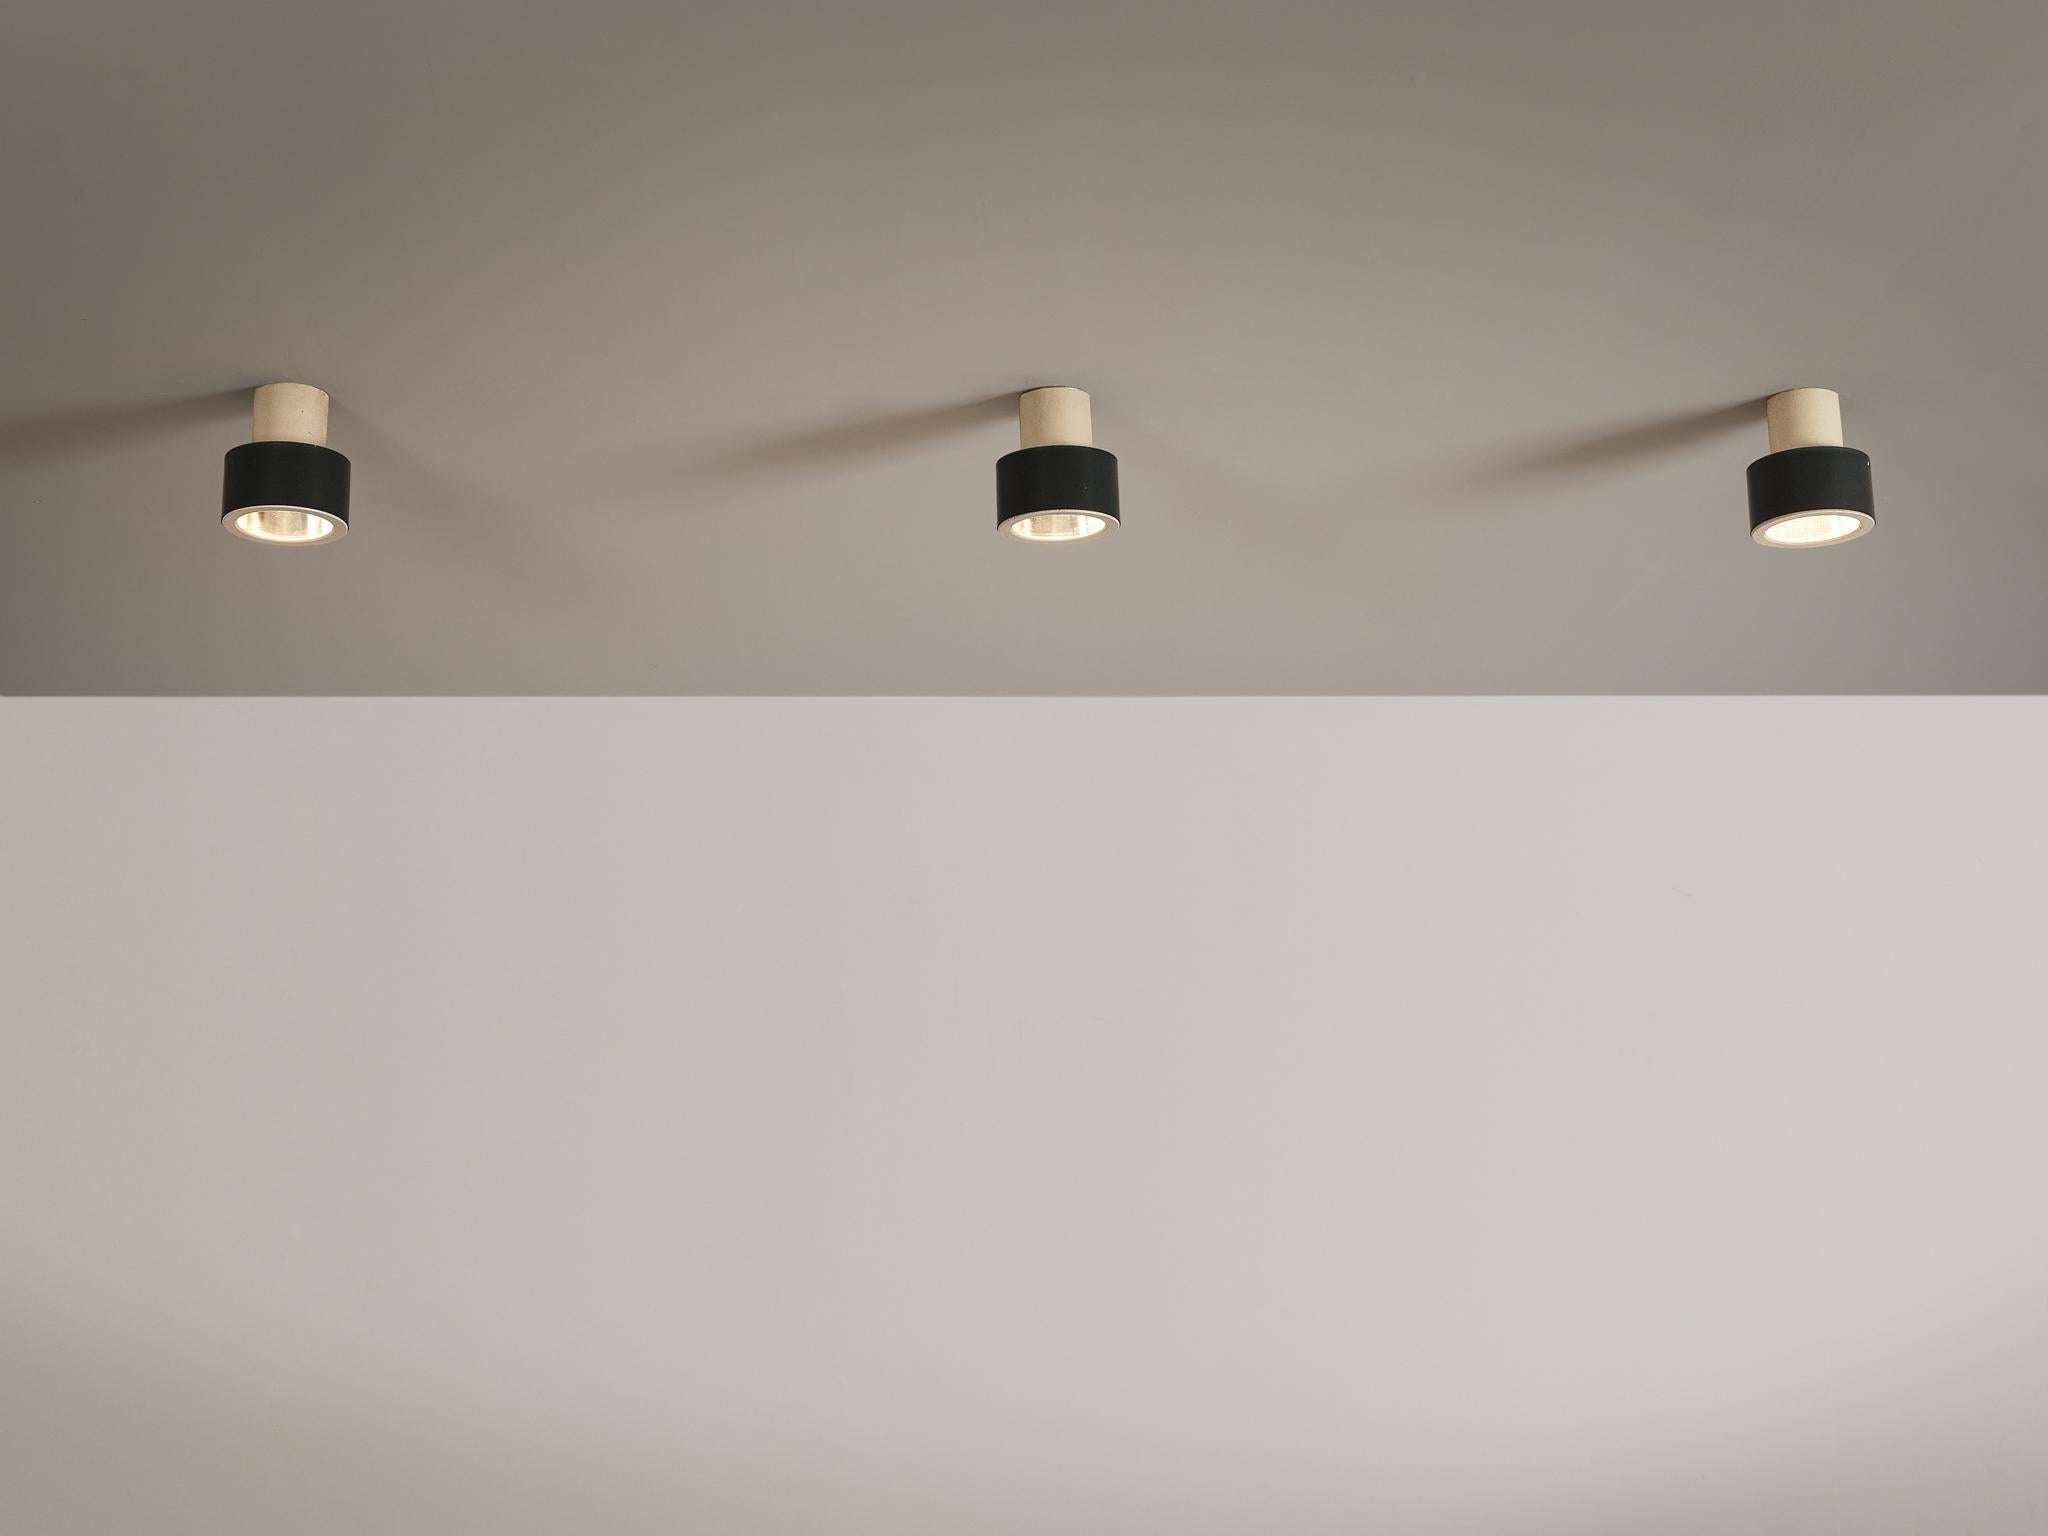 Flush mount pendants, metal, Europe, 1970s. 

Circular pendants consisting of two parts in black and white lacquered metal. A fresh design in neutral colors made in Europe in the 1970s. The shade is quite large, making it a remarkable light source